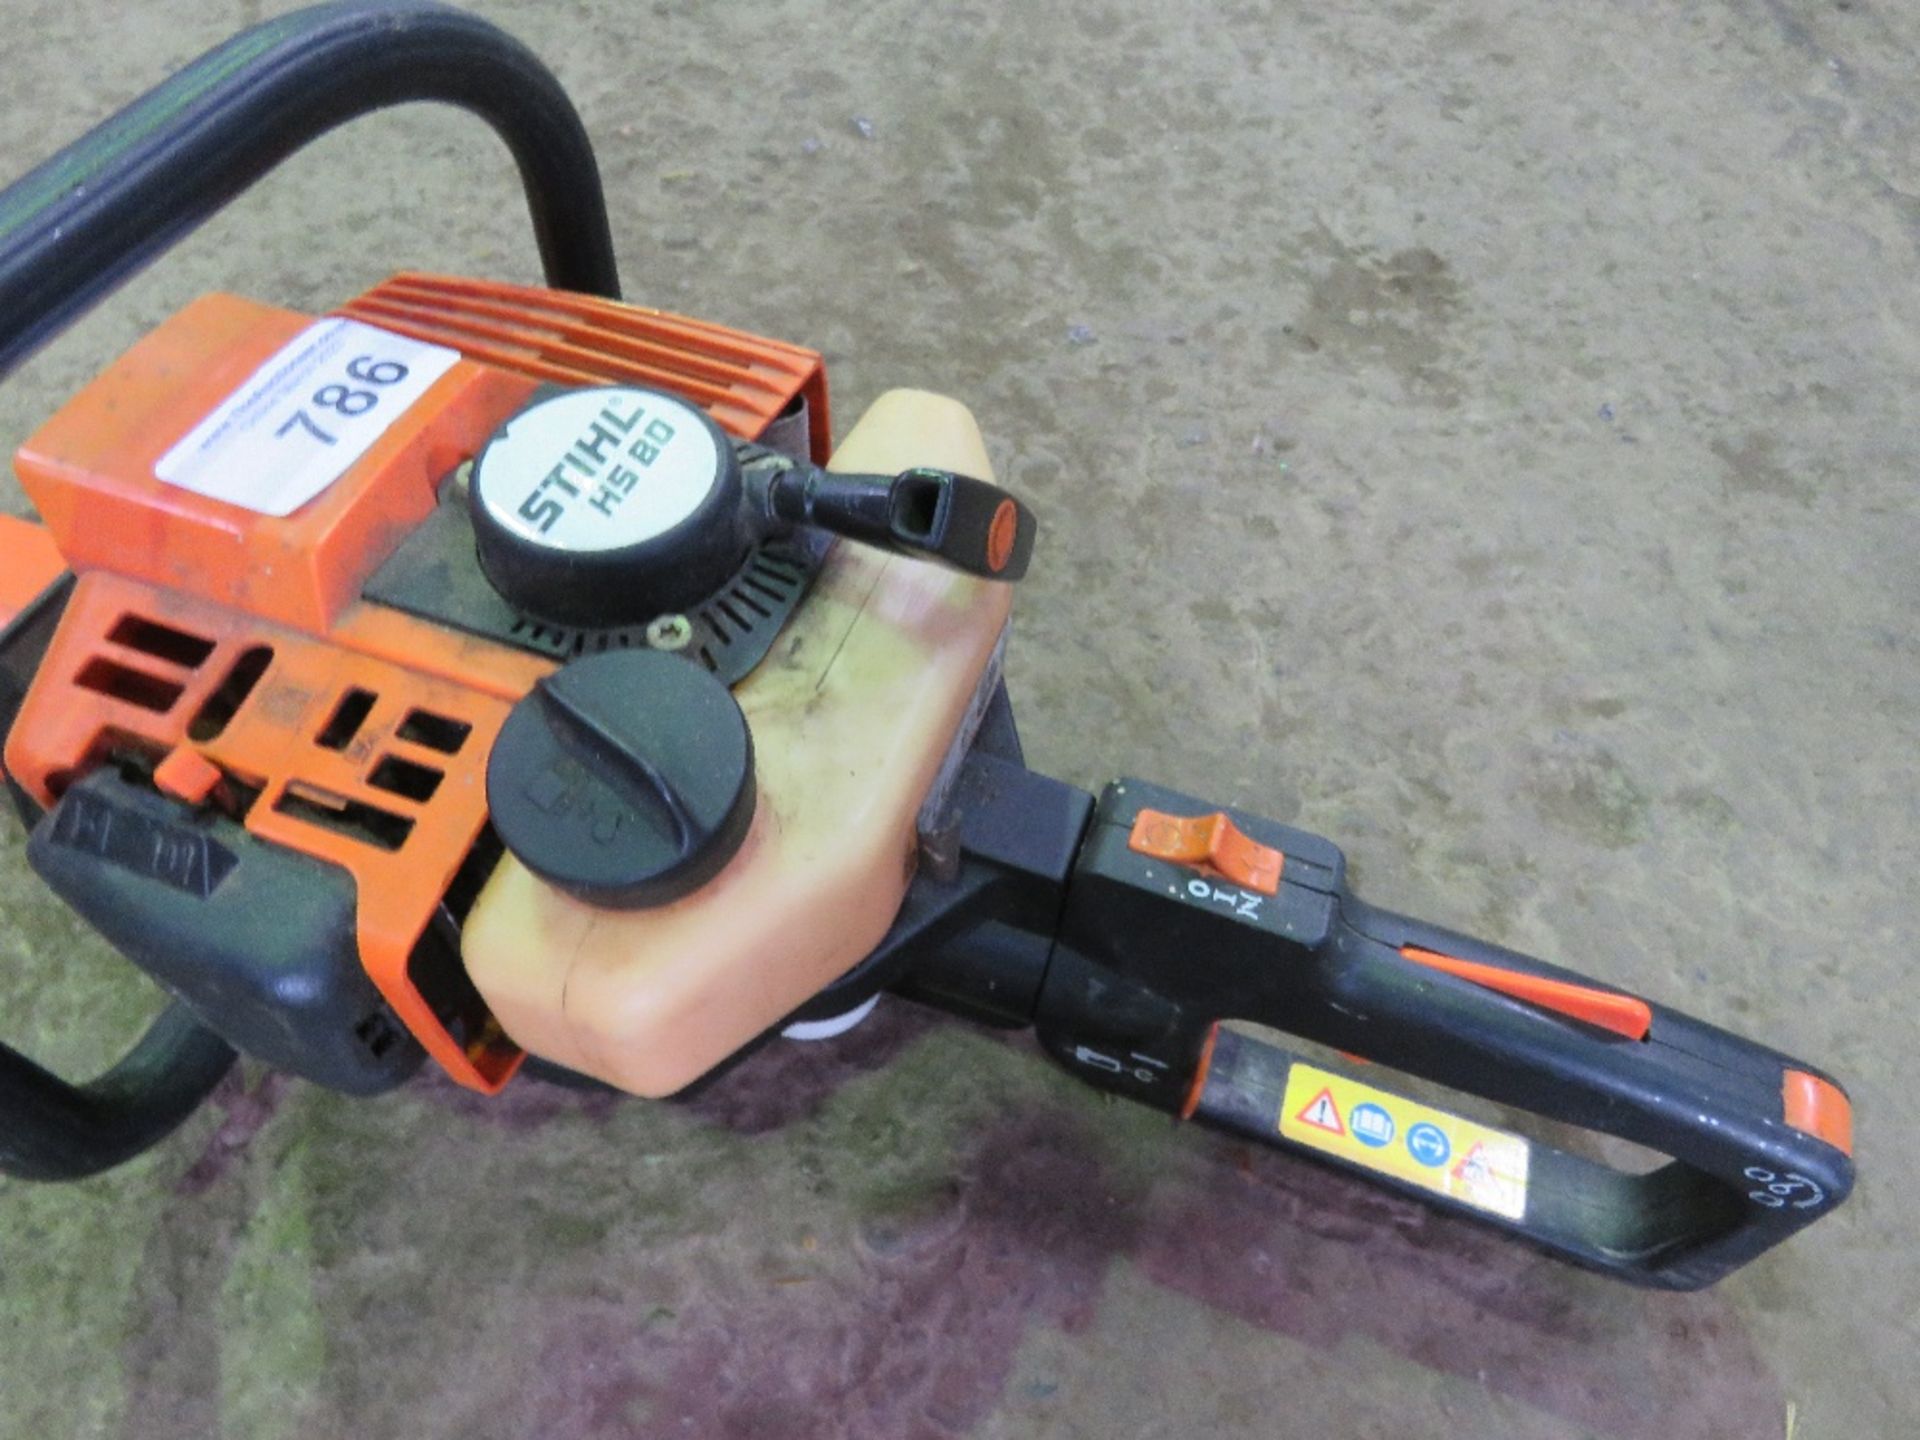 STIHL HS80 PETROL ENGINED HEDGE CUTTER. DIRECT FROM RETIRING BUILDER. THIS LOT IS SOLD UNDE - Bild 2 aus 4